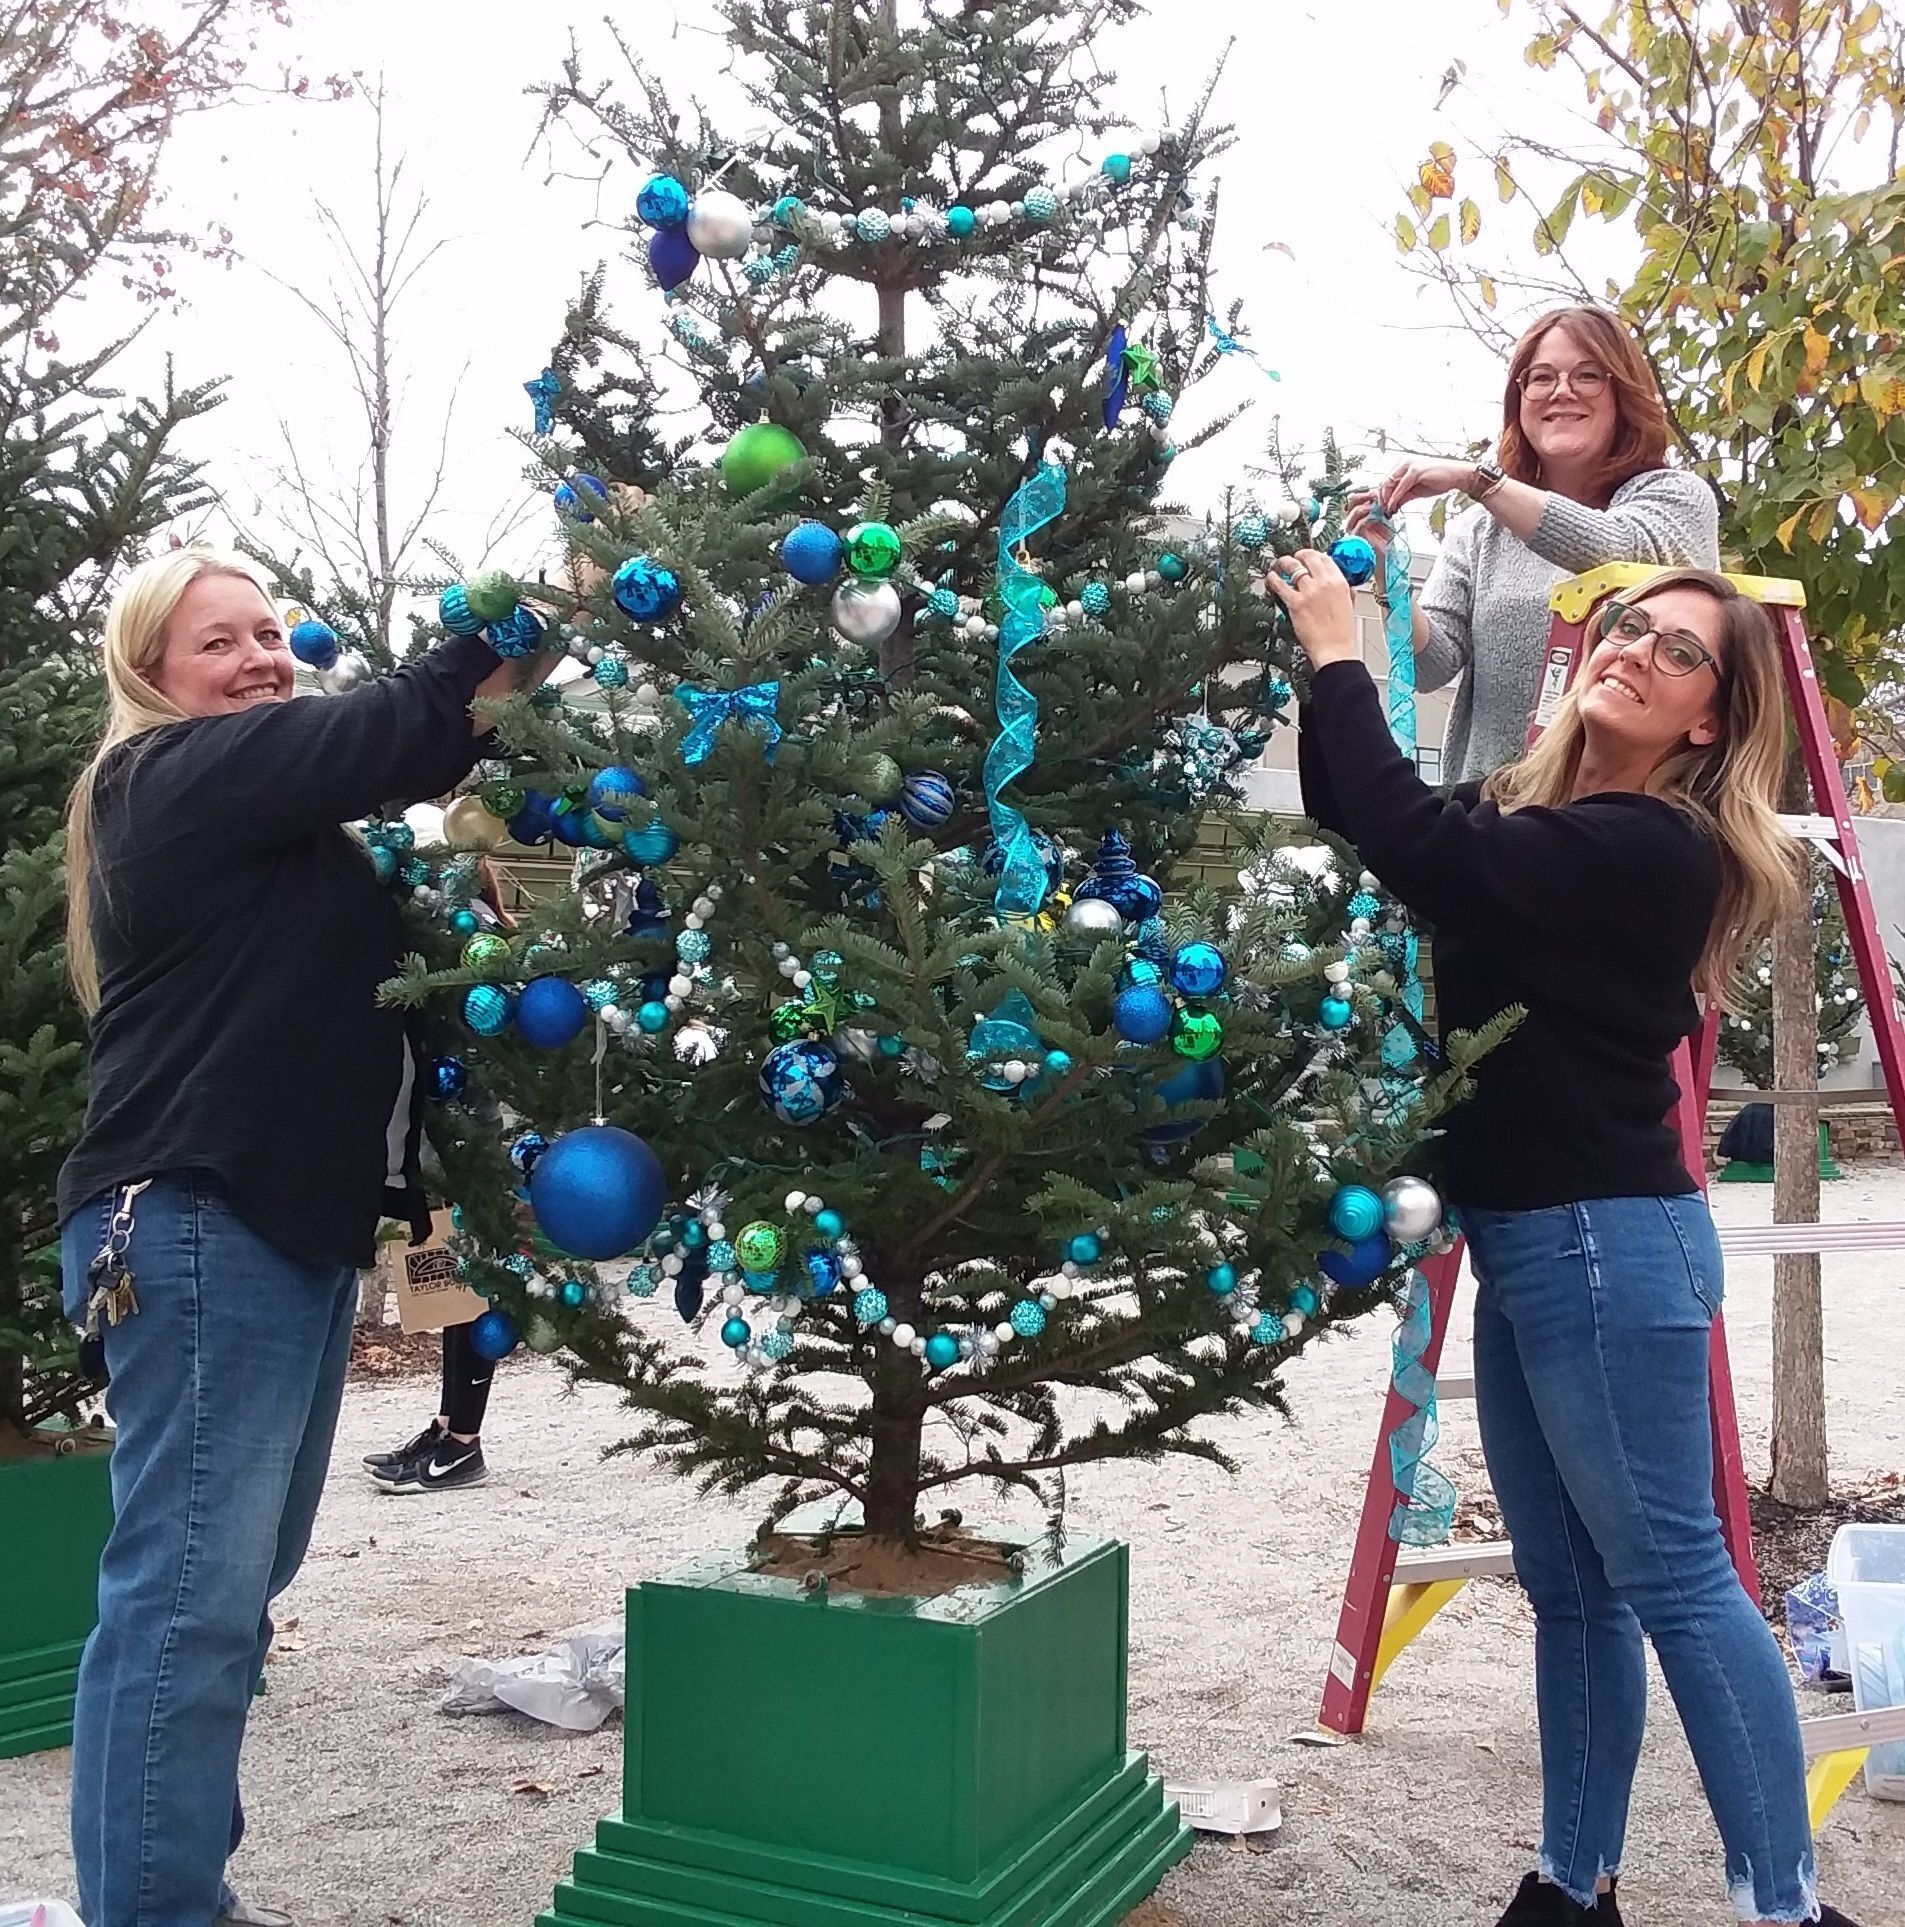 The Habitat ReStore tree is shining bright at the Holly Jolly Brawley Walkway! Our "Home for the Holidays" theme is a heartfelt reminder of the joy and comfort a home brings. 